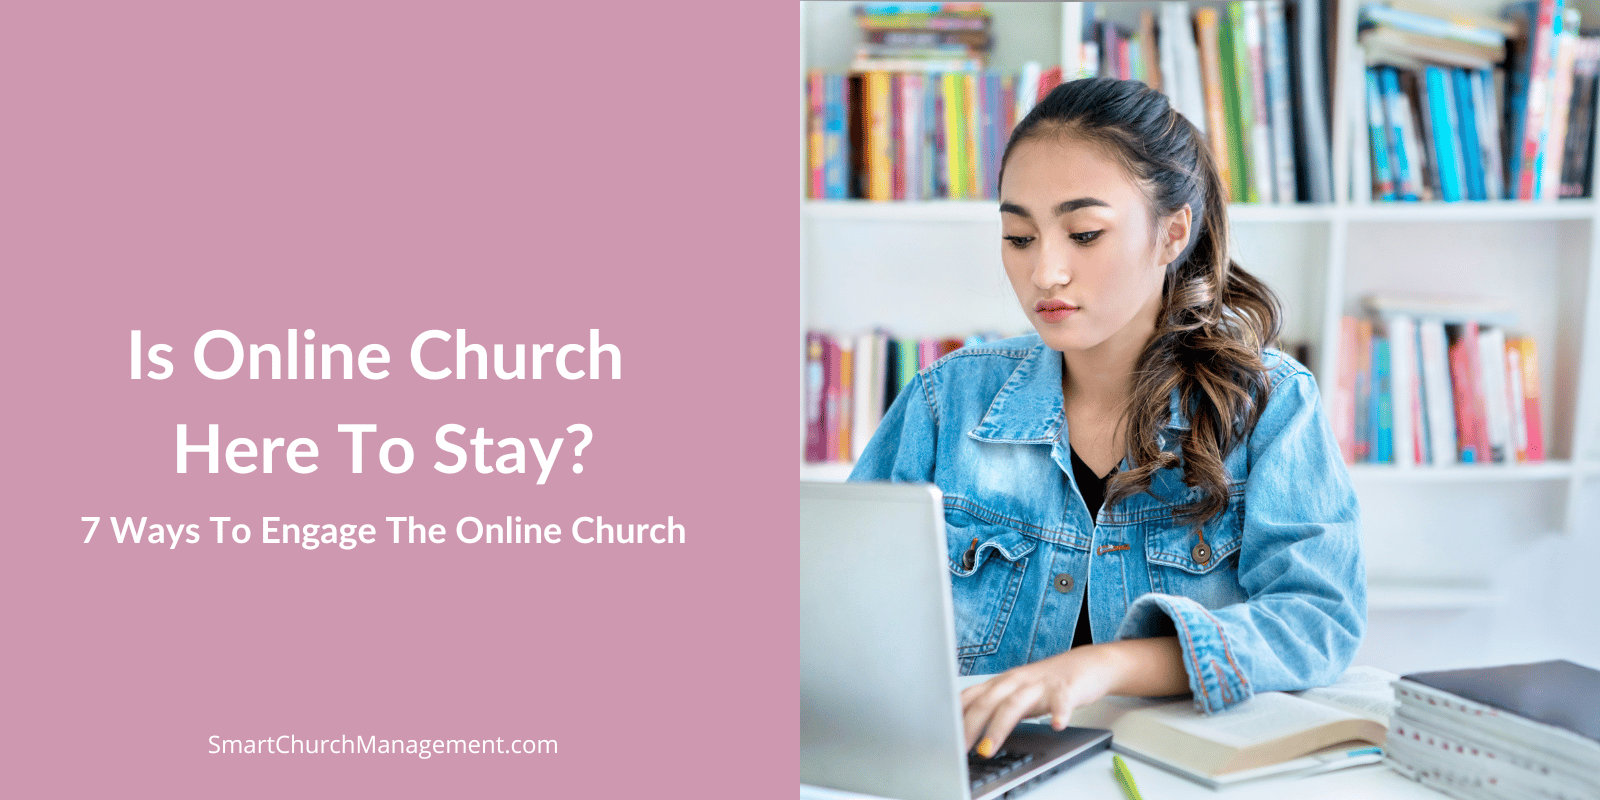 Is online church here to stay?